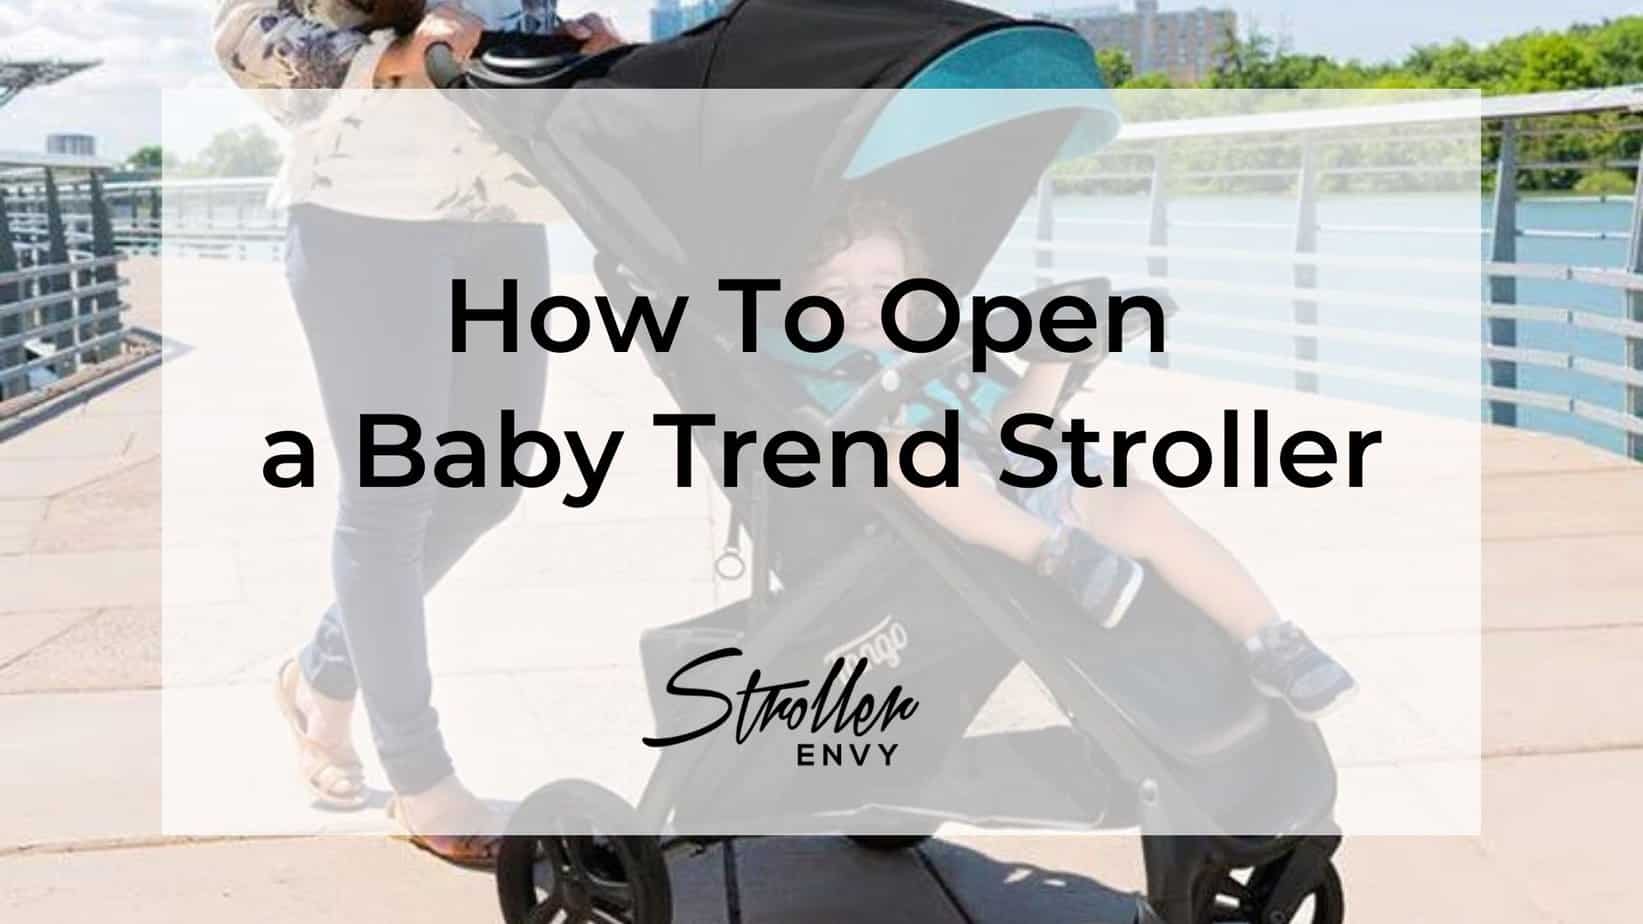 How To Open a Baby Trend Stroller